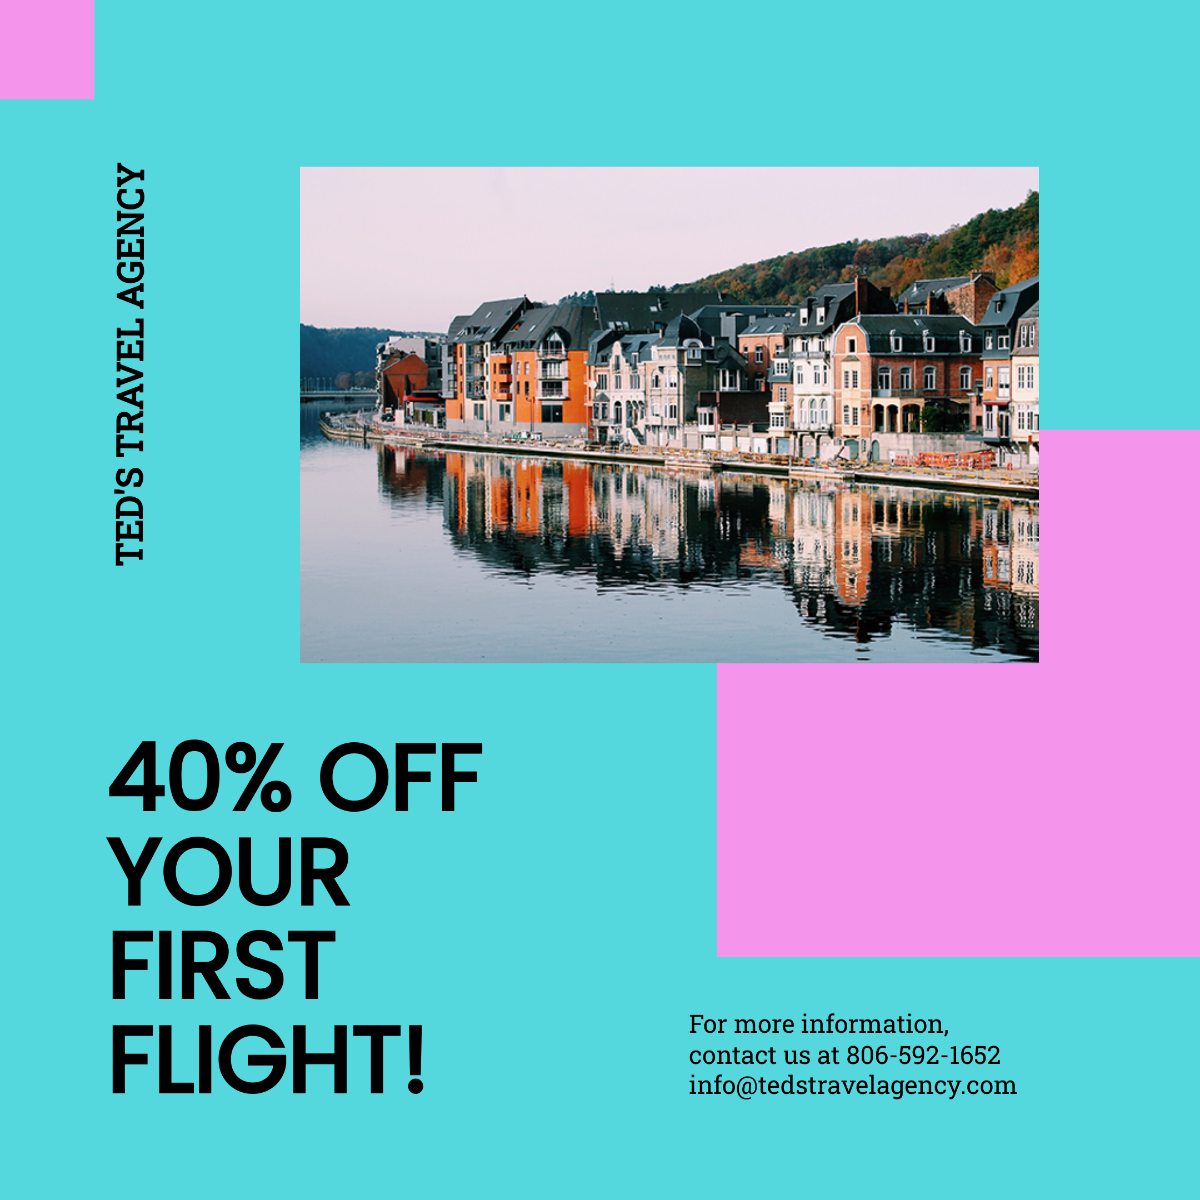 Free Airplane Travel Instagram Post Template